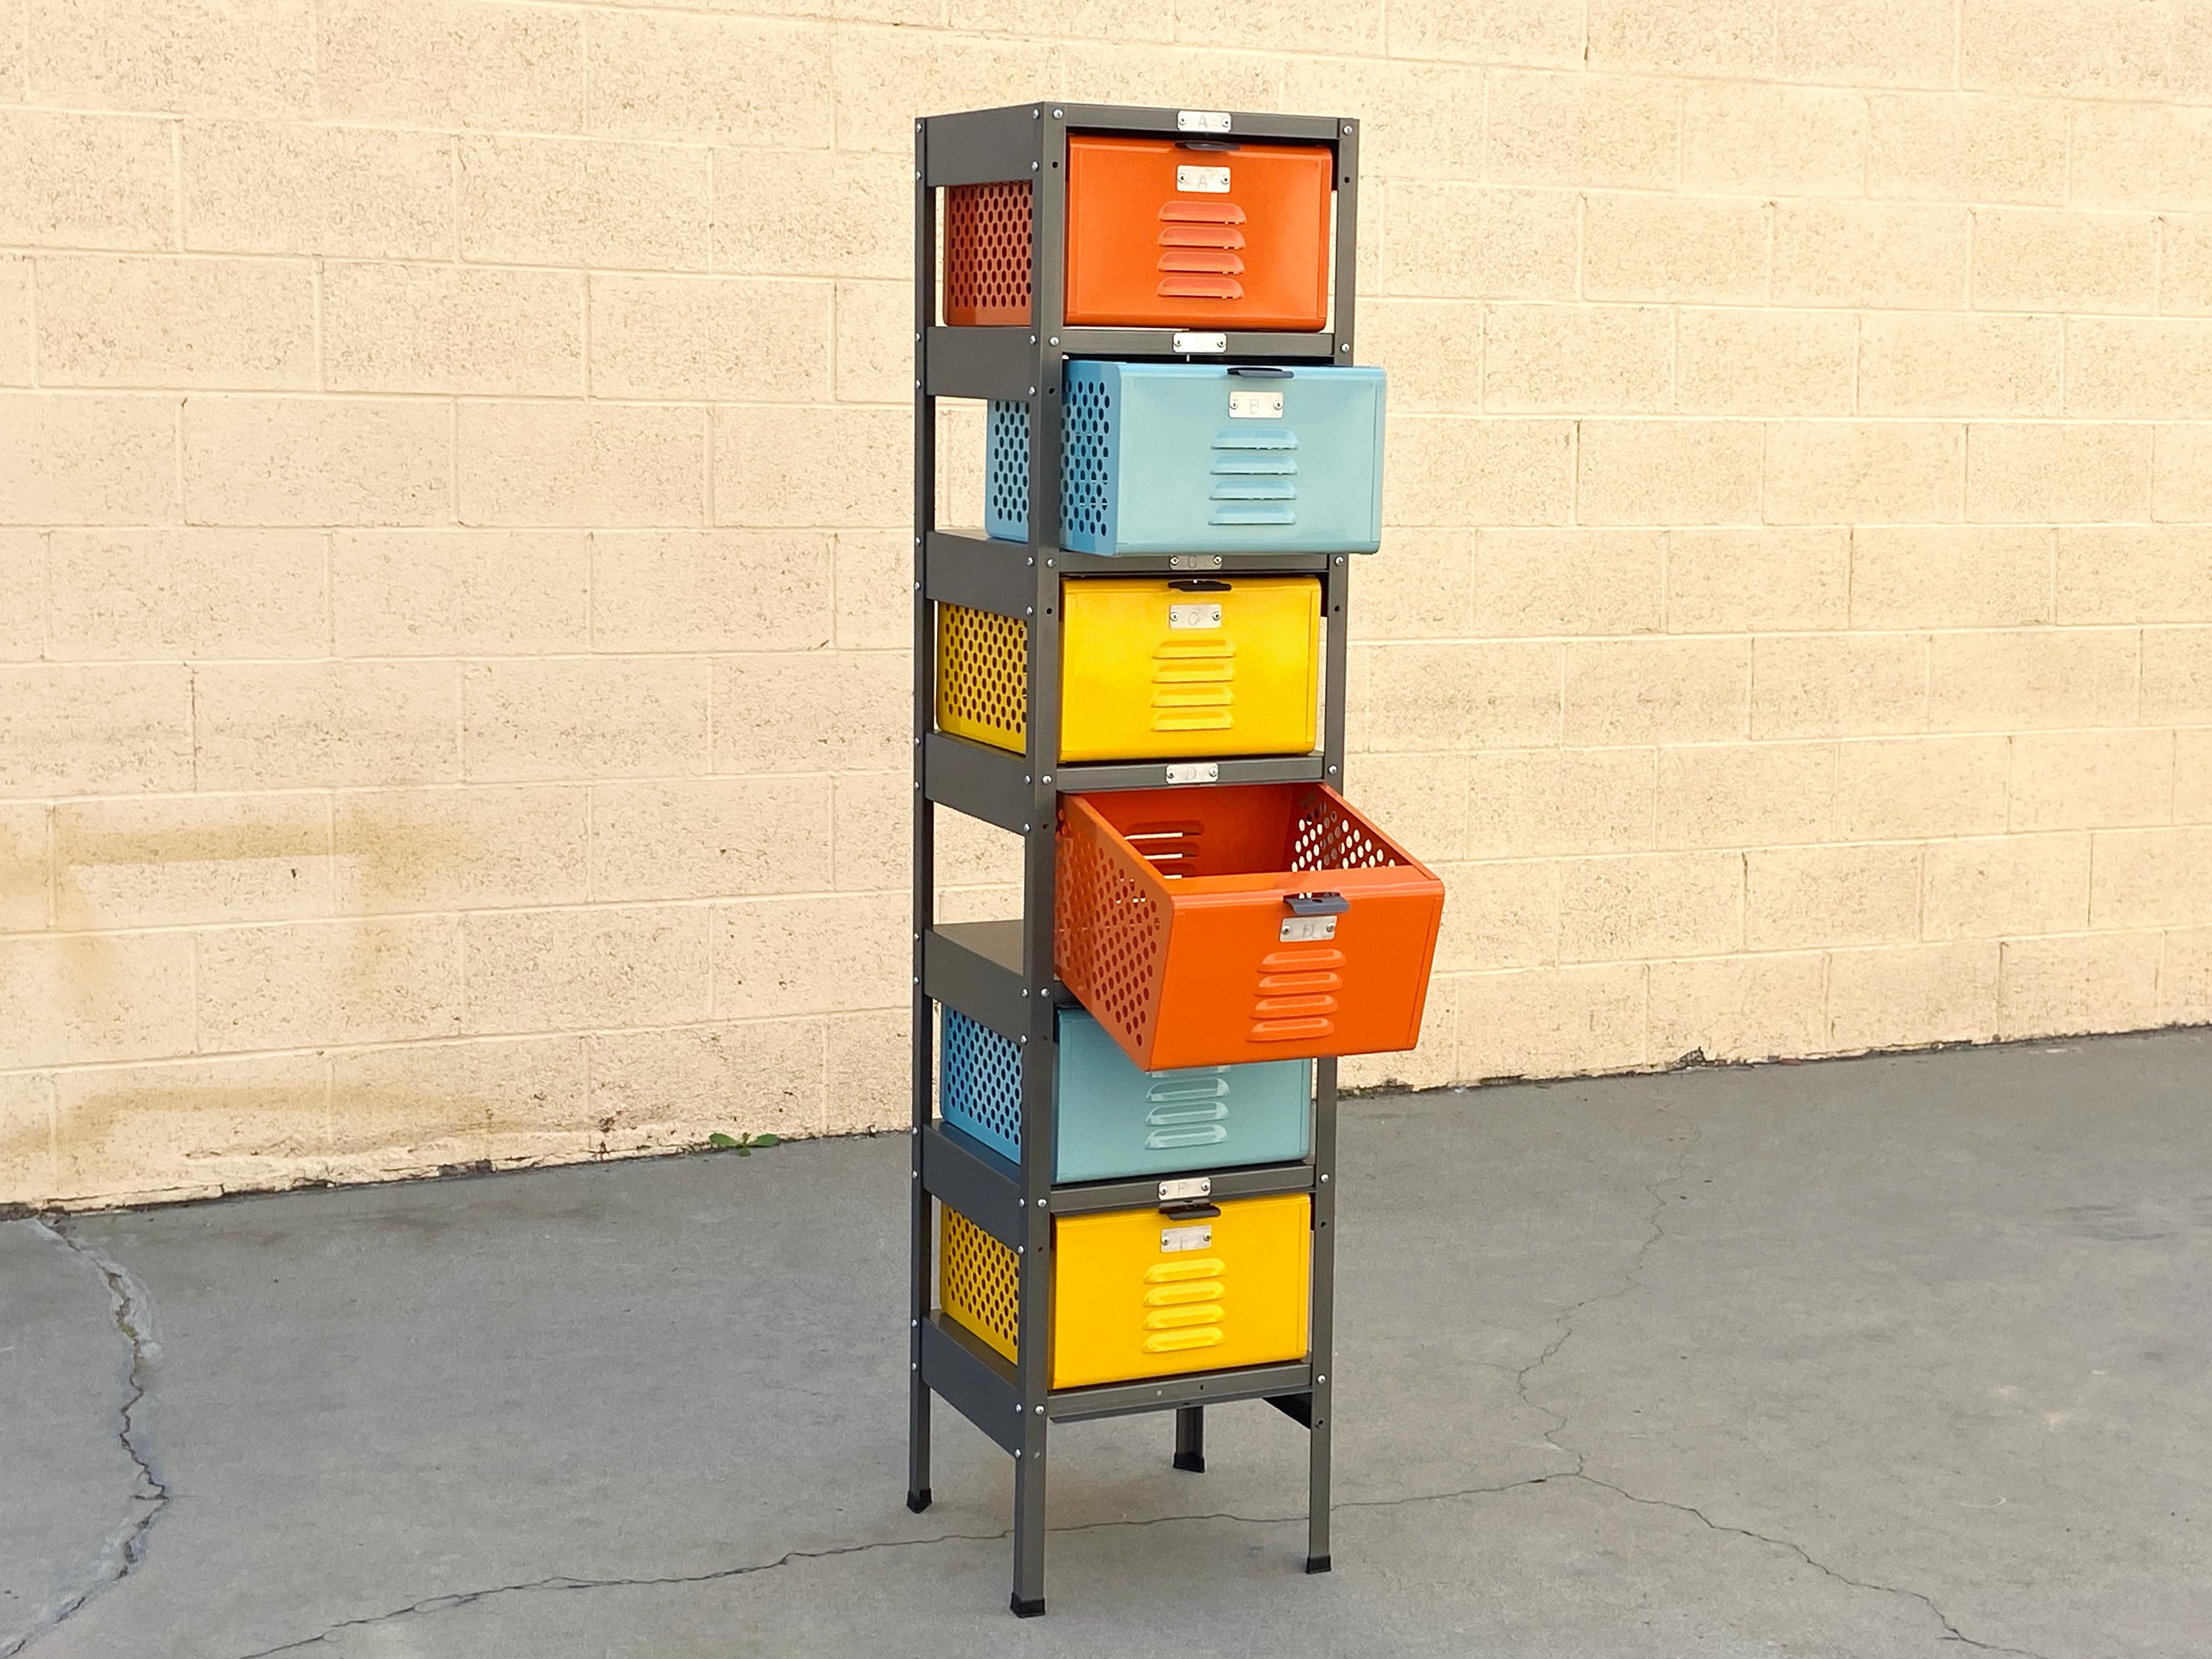 All new, custom fabricated 1 wide x 6 high locker basket unit inspired by those of the 1950s and 1960s. Customize your baskets and frame in tons of fun colors! Drawers feature capability to add lock.

As pictured: Natural steel powder coated frame